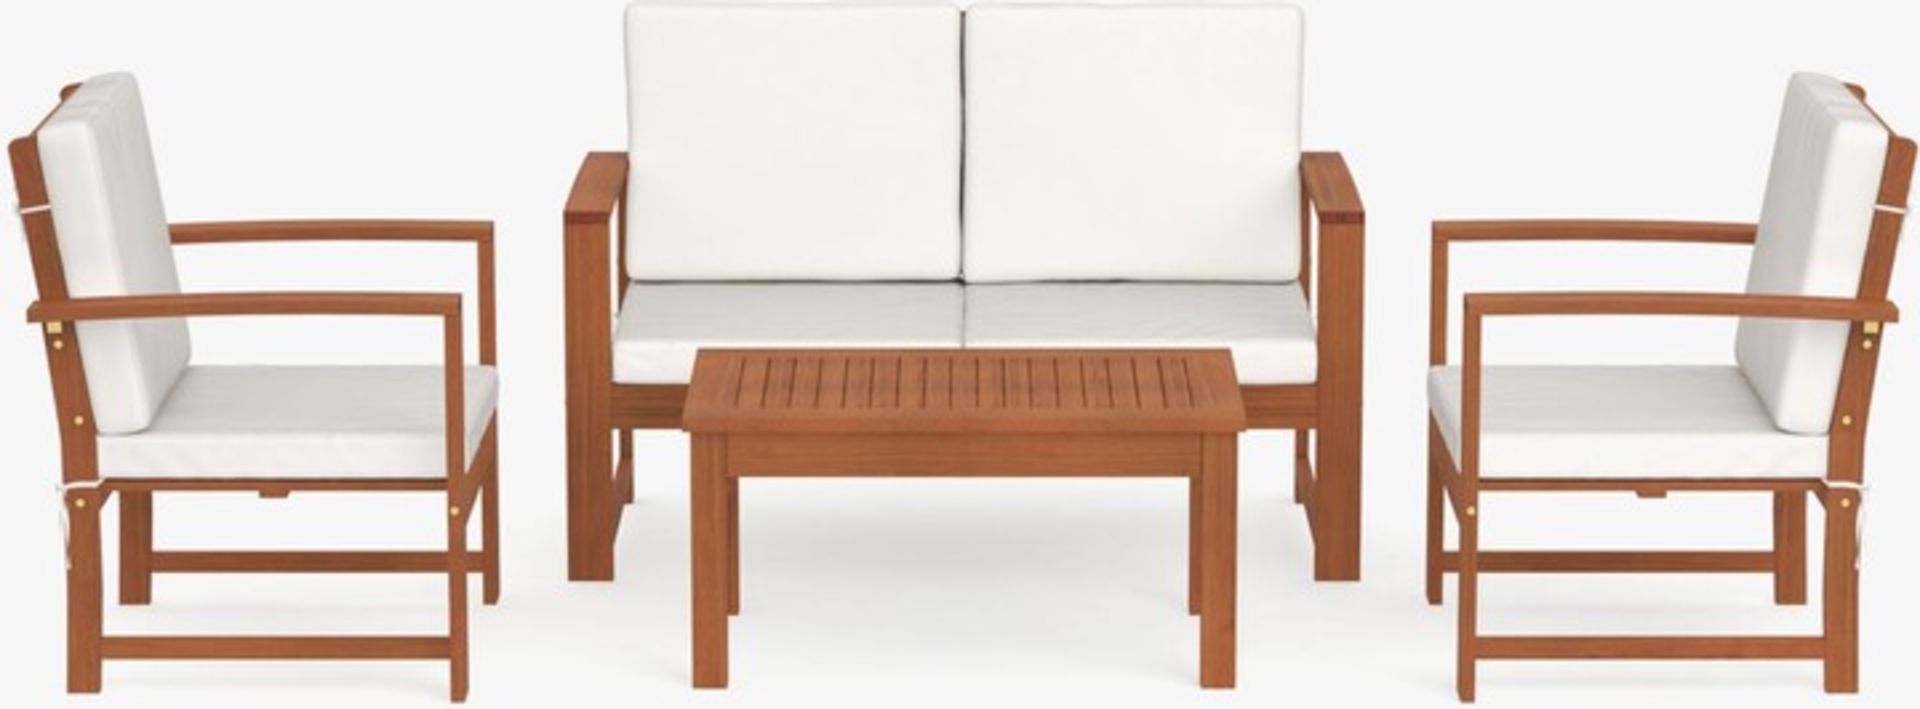 BRAND NEW JOHN LEWIS 4-Seater Garden Lounging Table & Chairs Set. RRP £898.50. Upgrade your garden - Image 2 of 3